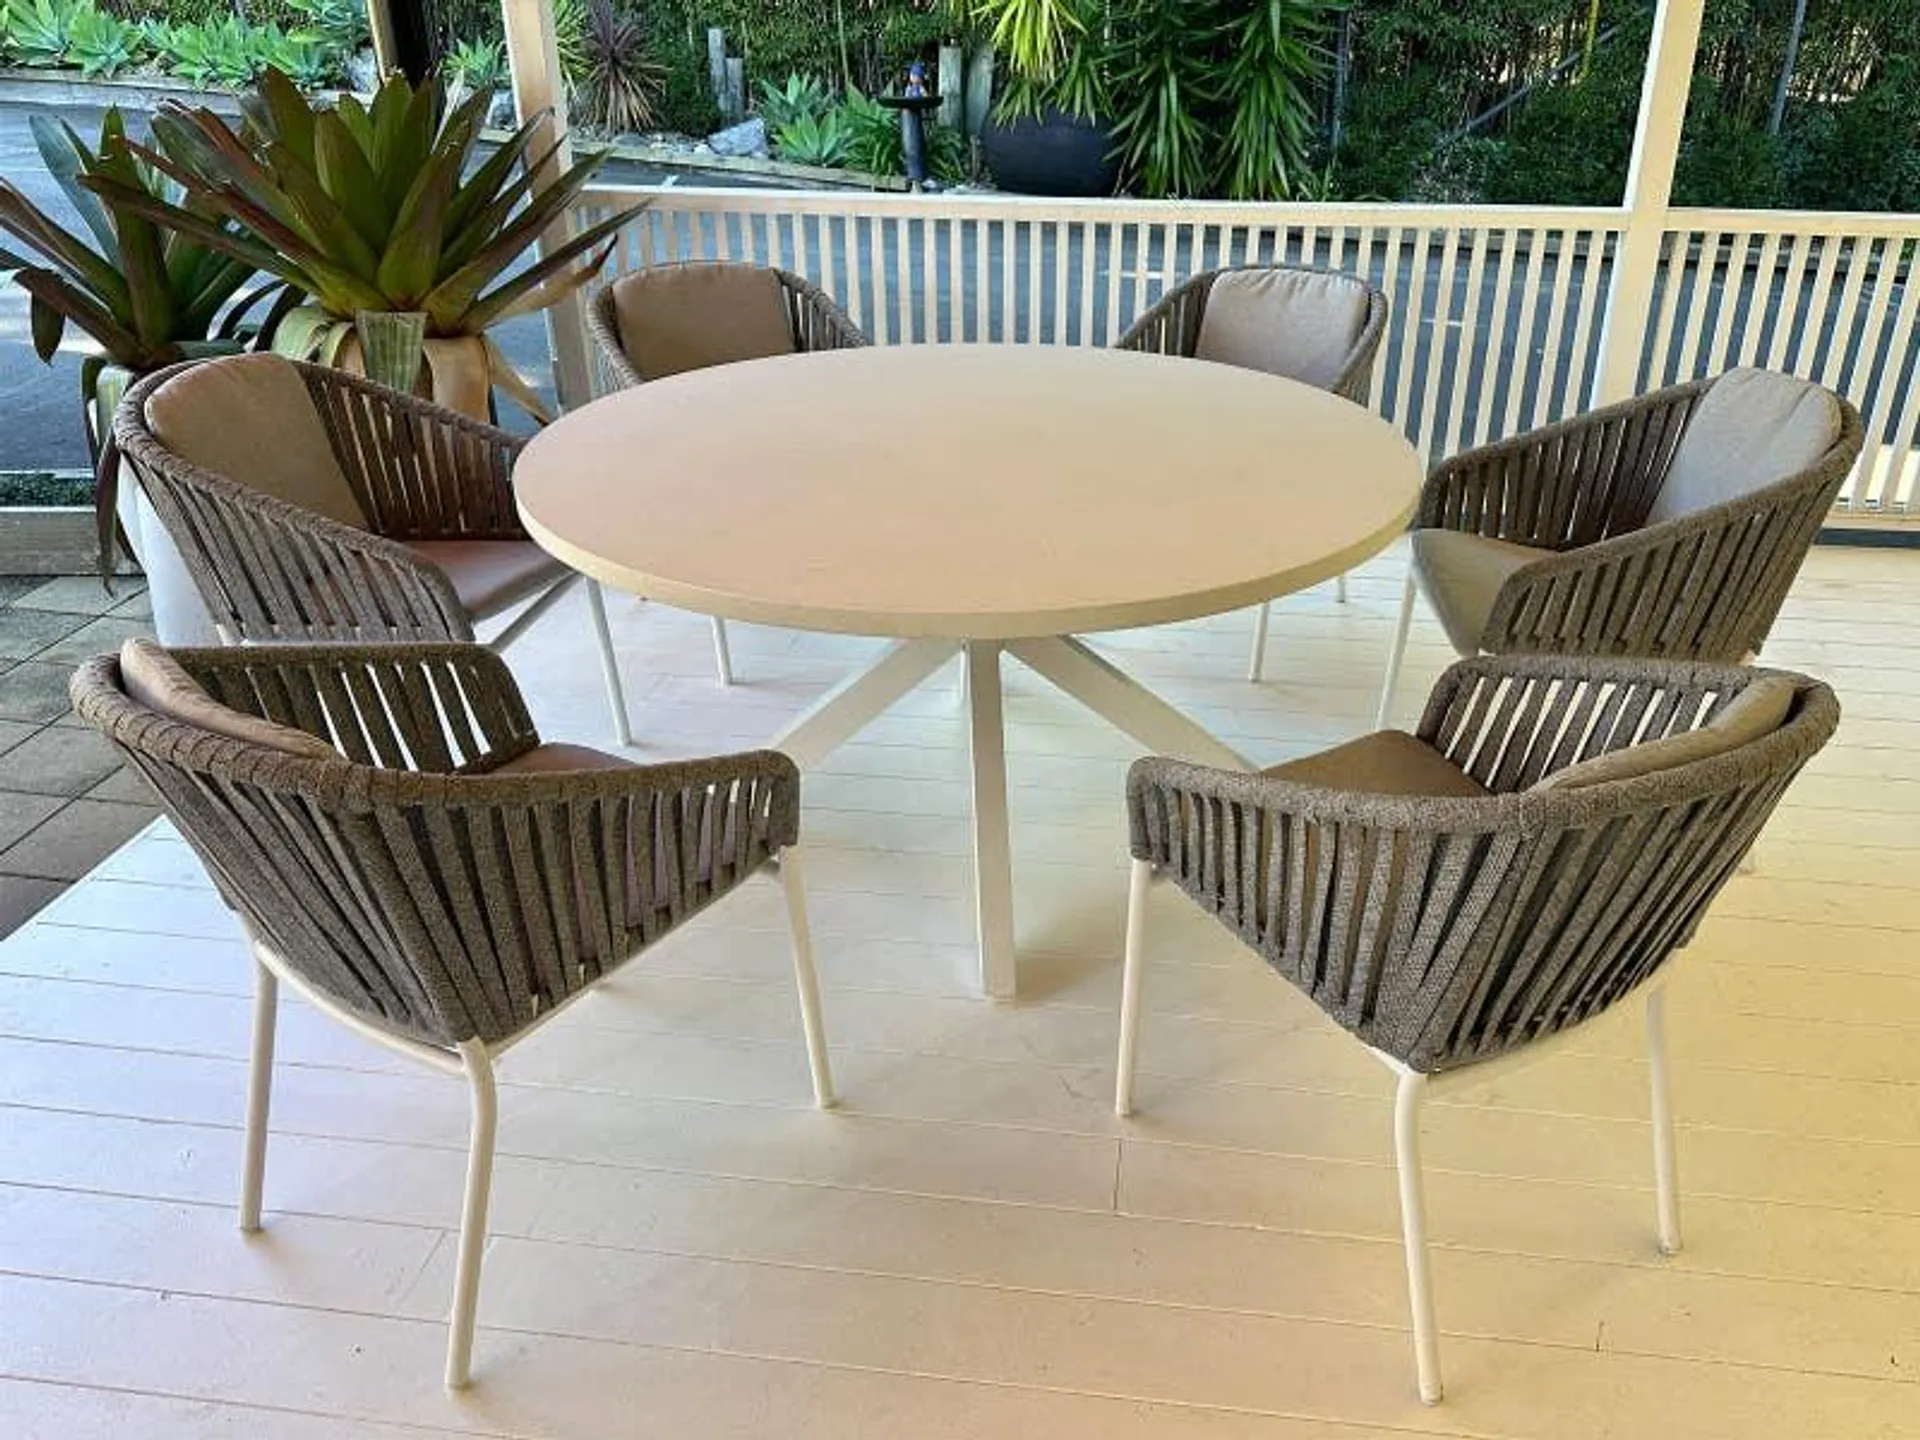 Geo Terrazzo Table with Melang Chairs 7pc Outdoor Dining Setting